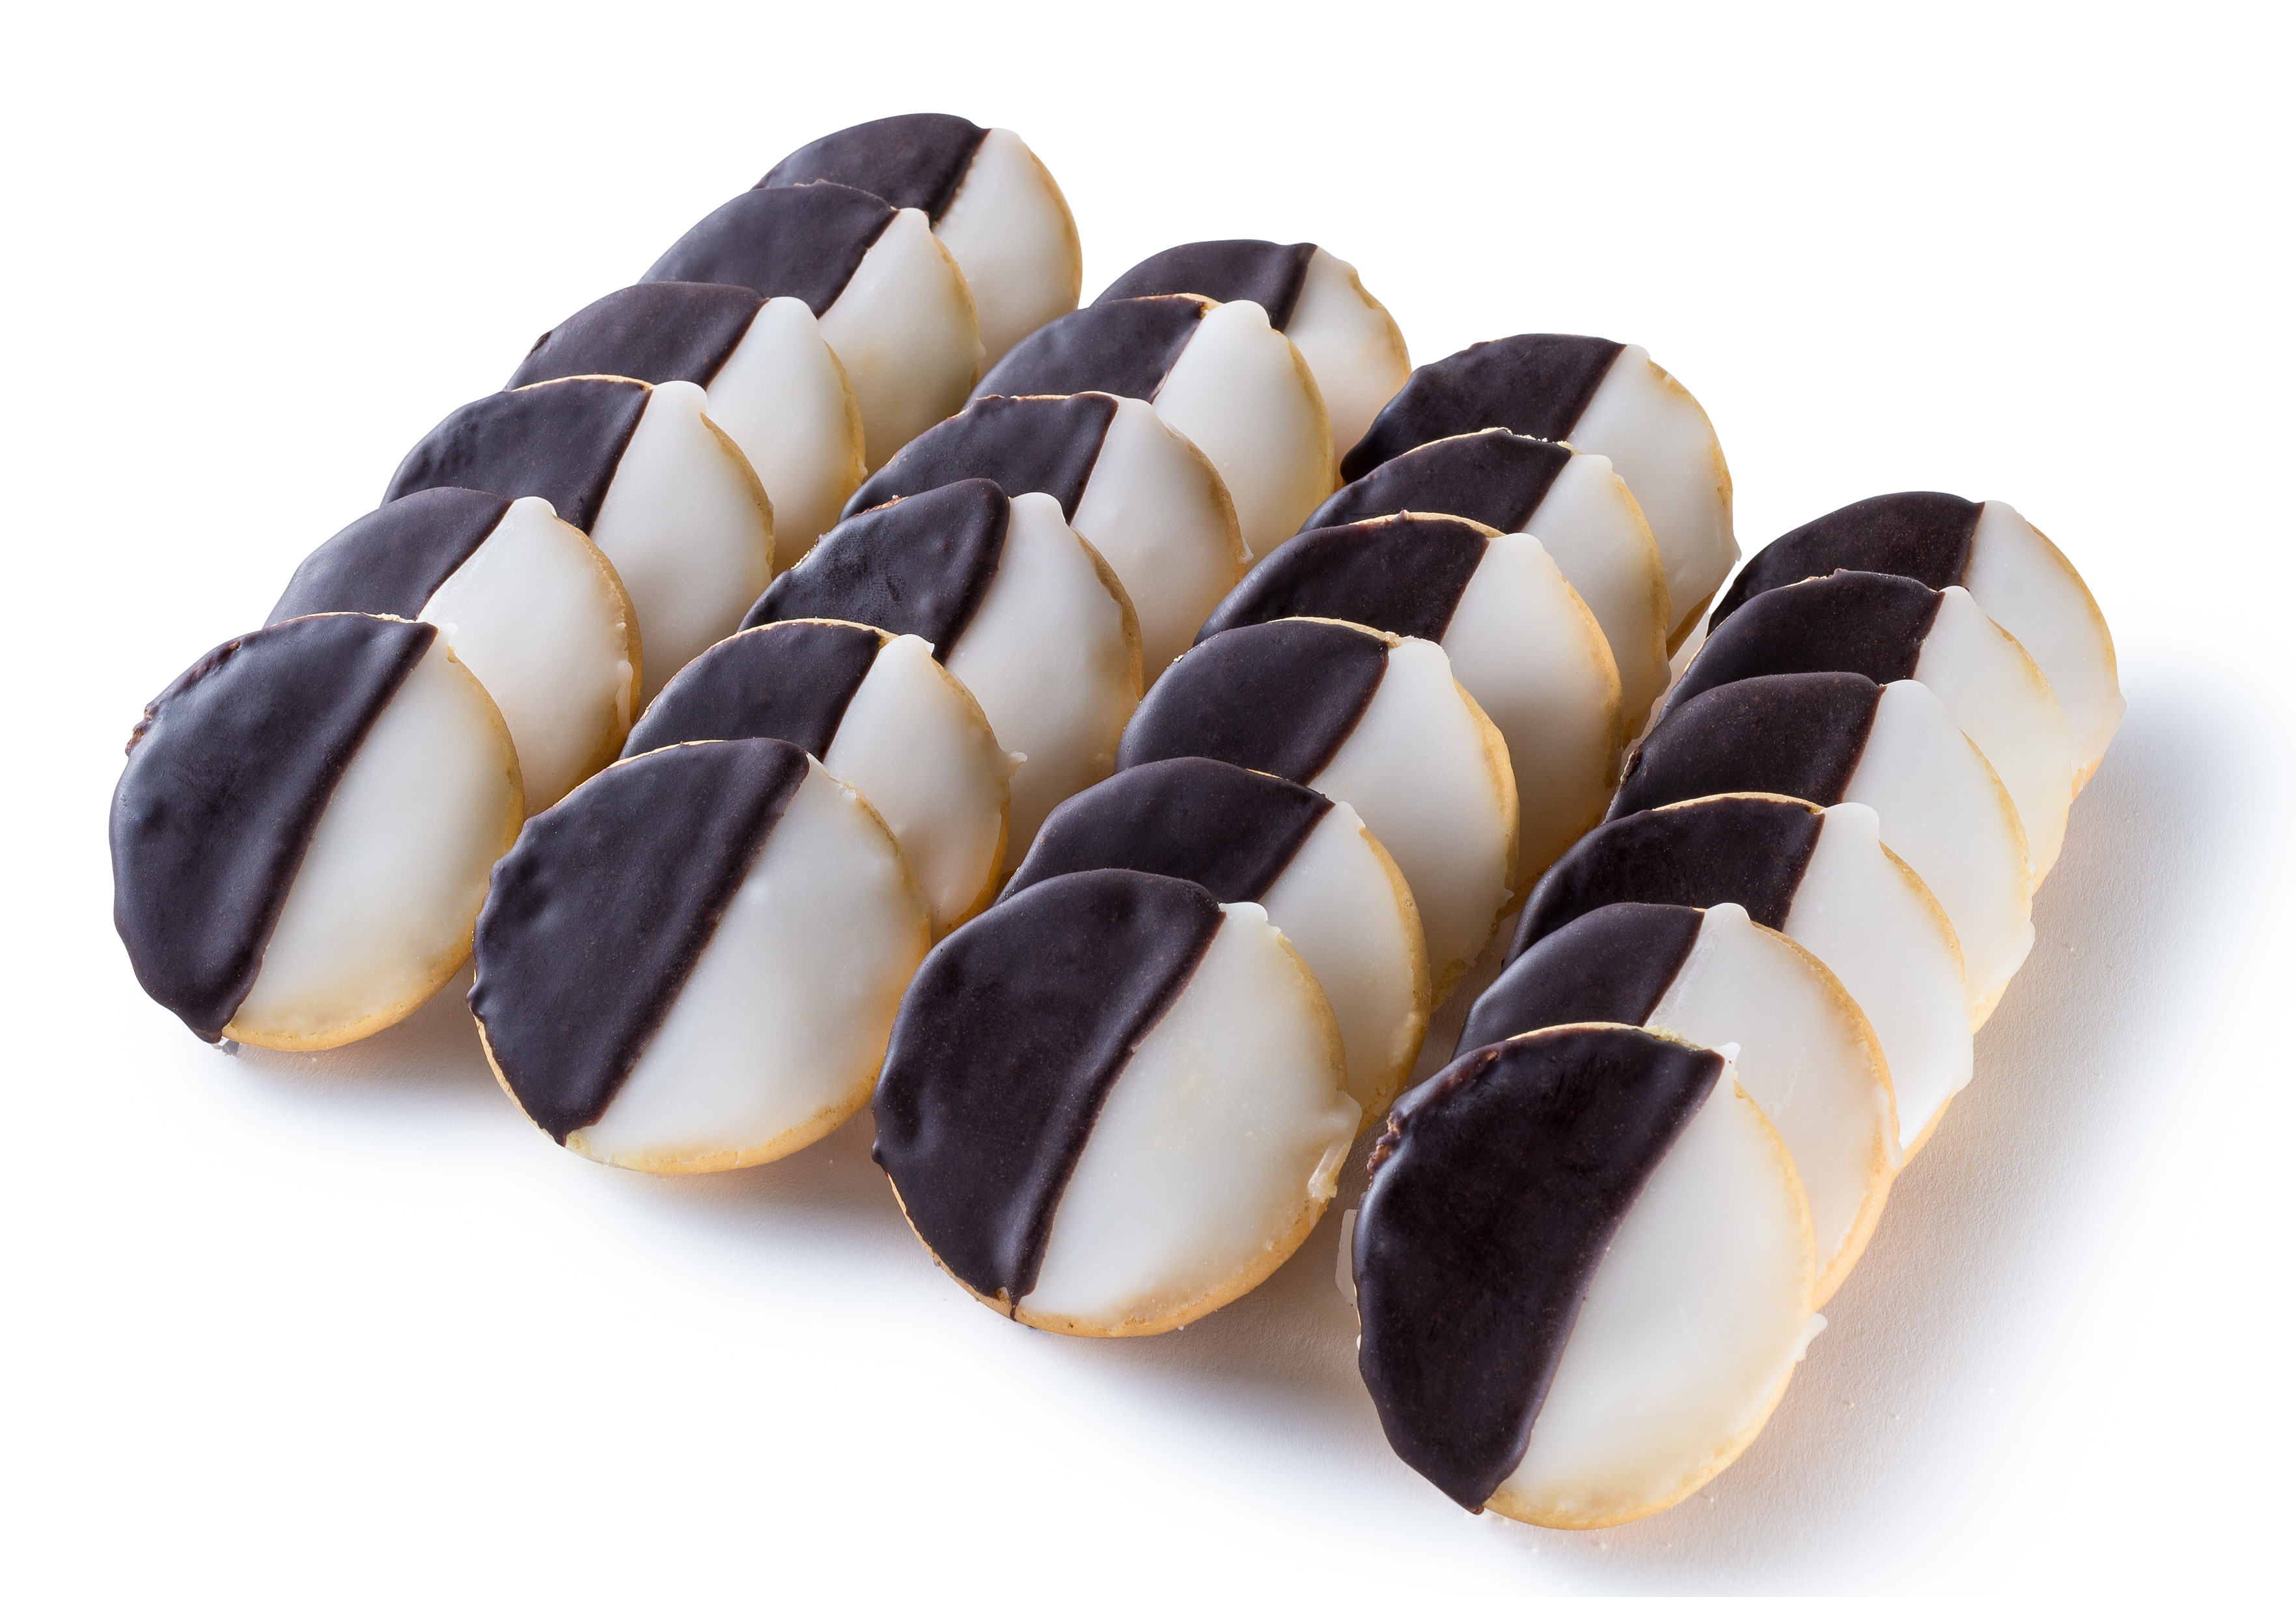 24 Black and White Cookies